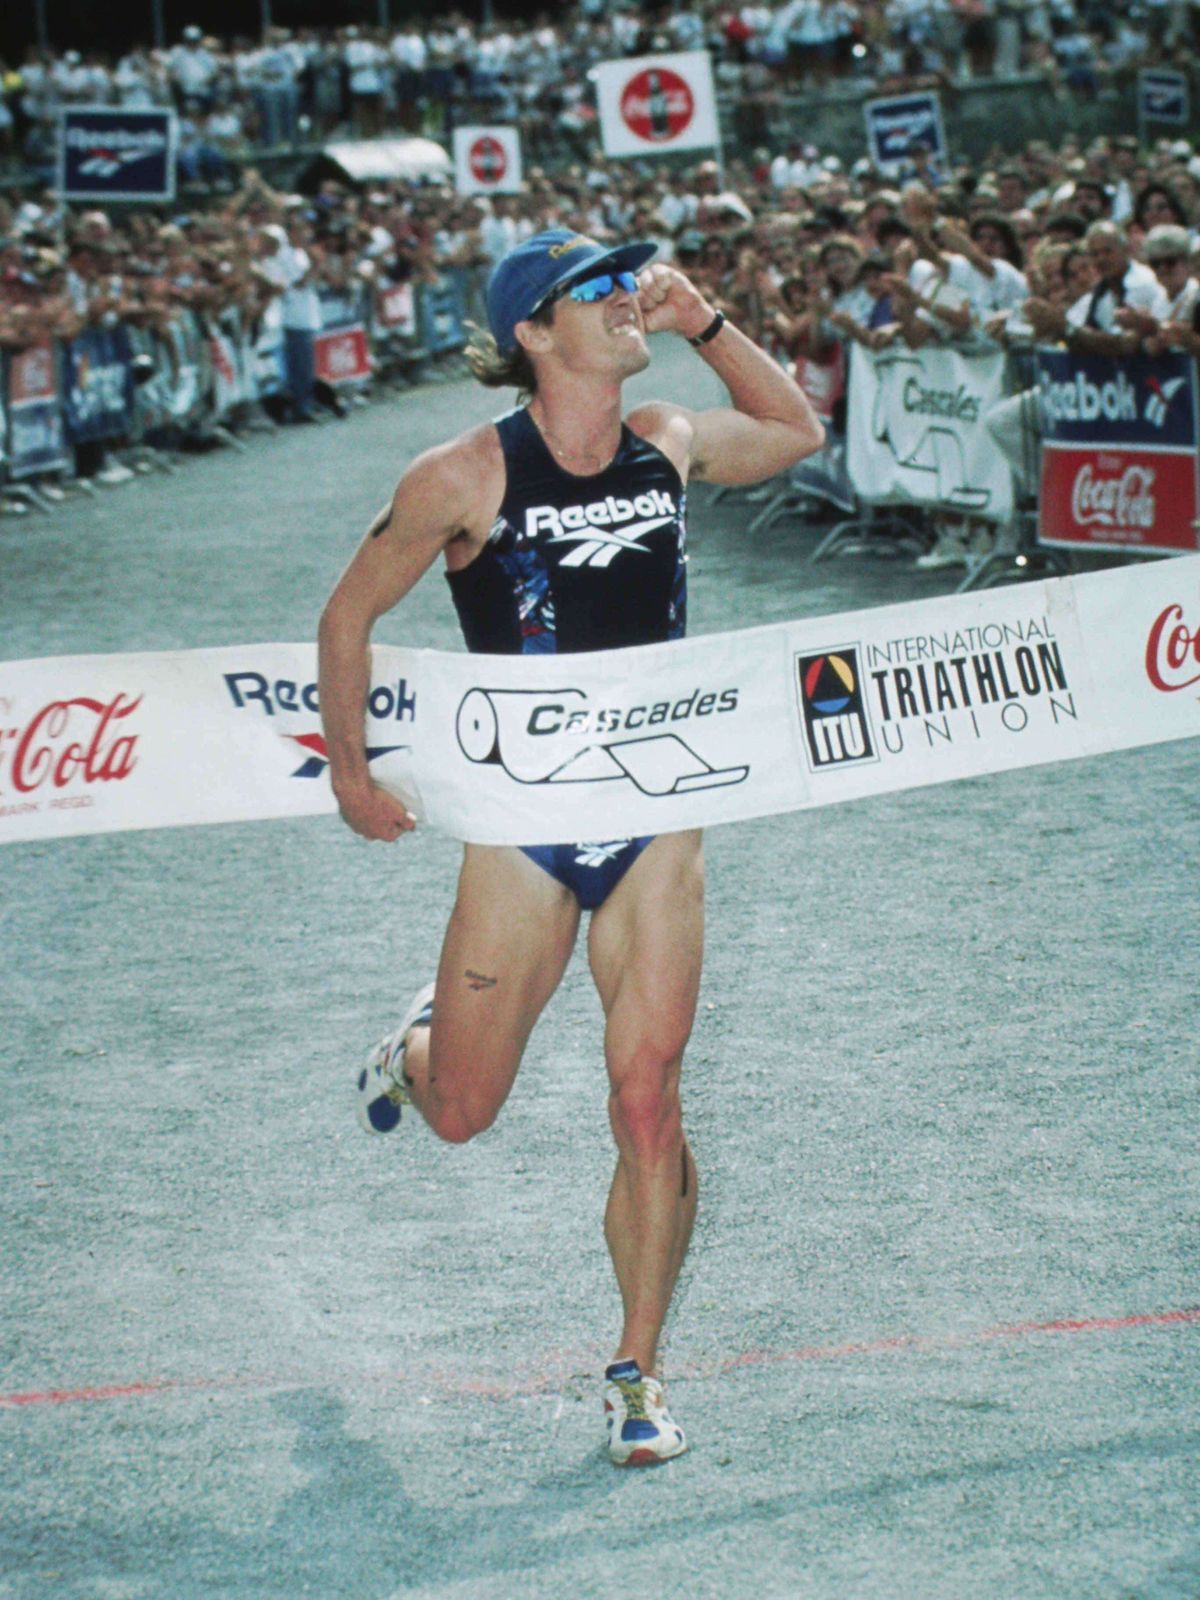 Brad Beven inducted in to Triathlon Australia’s Hall of Fame